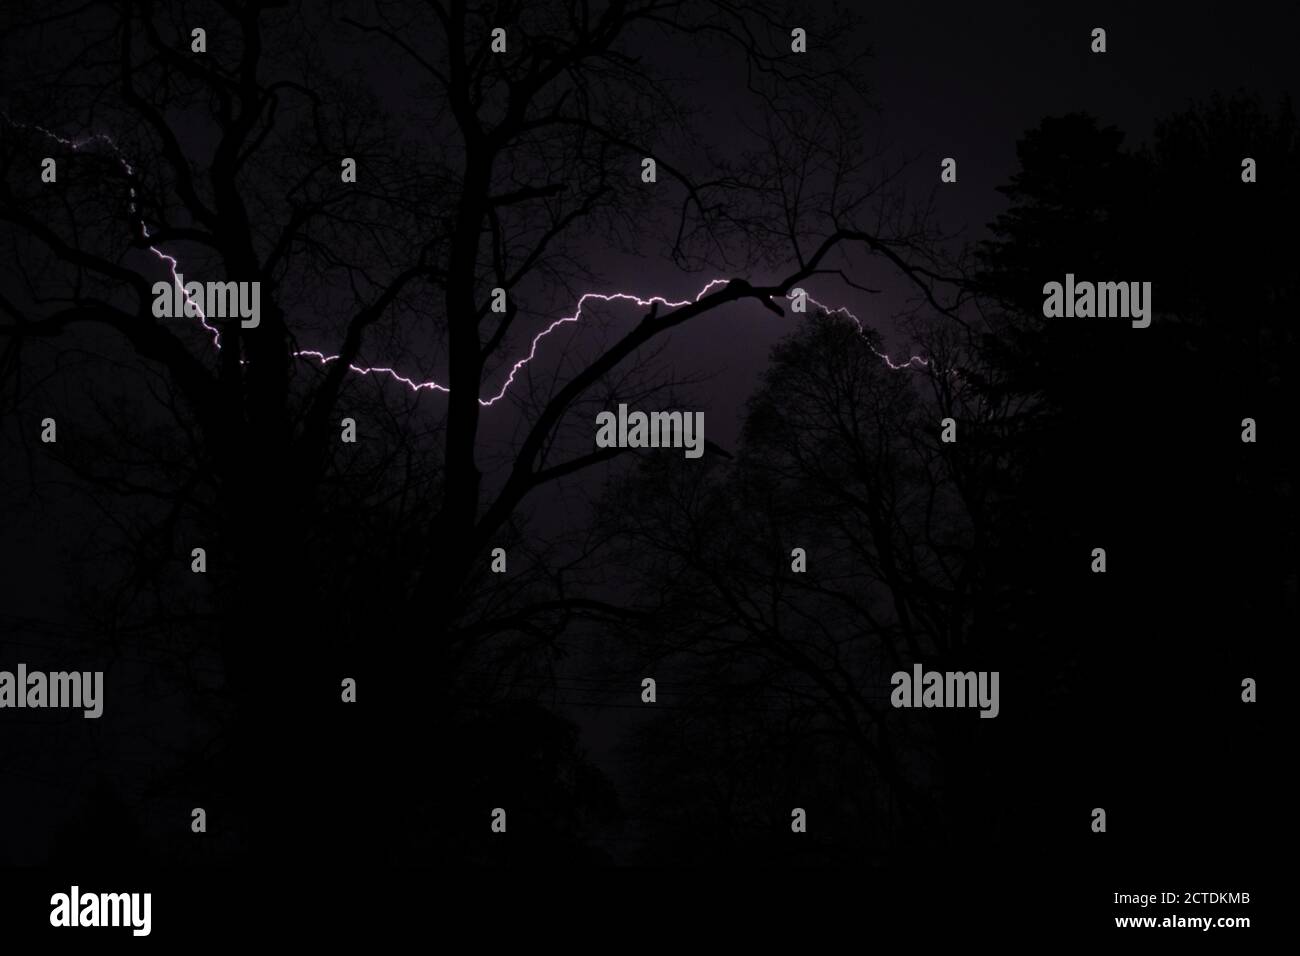 A Purple Lightning Strike Behind Silhouetted Trees Stock Photo